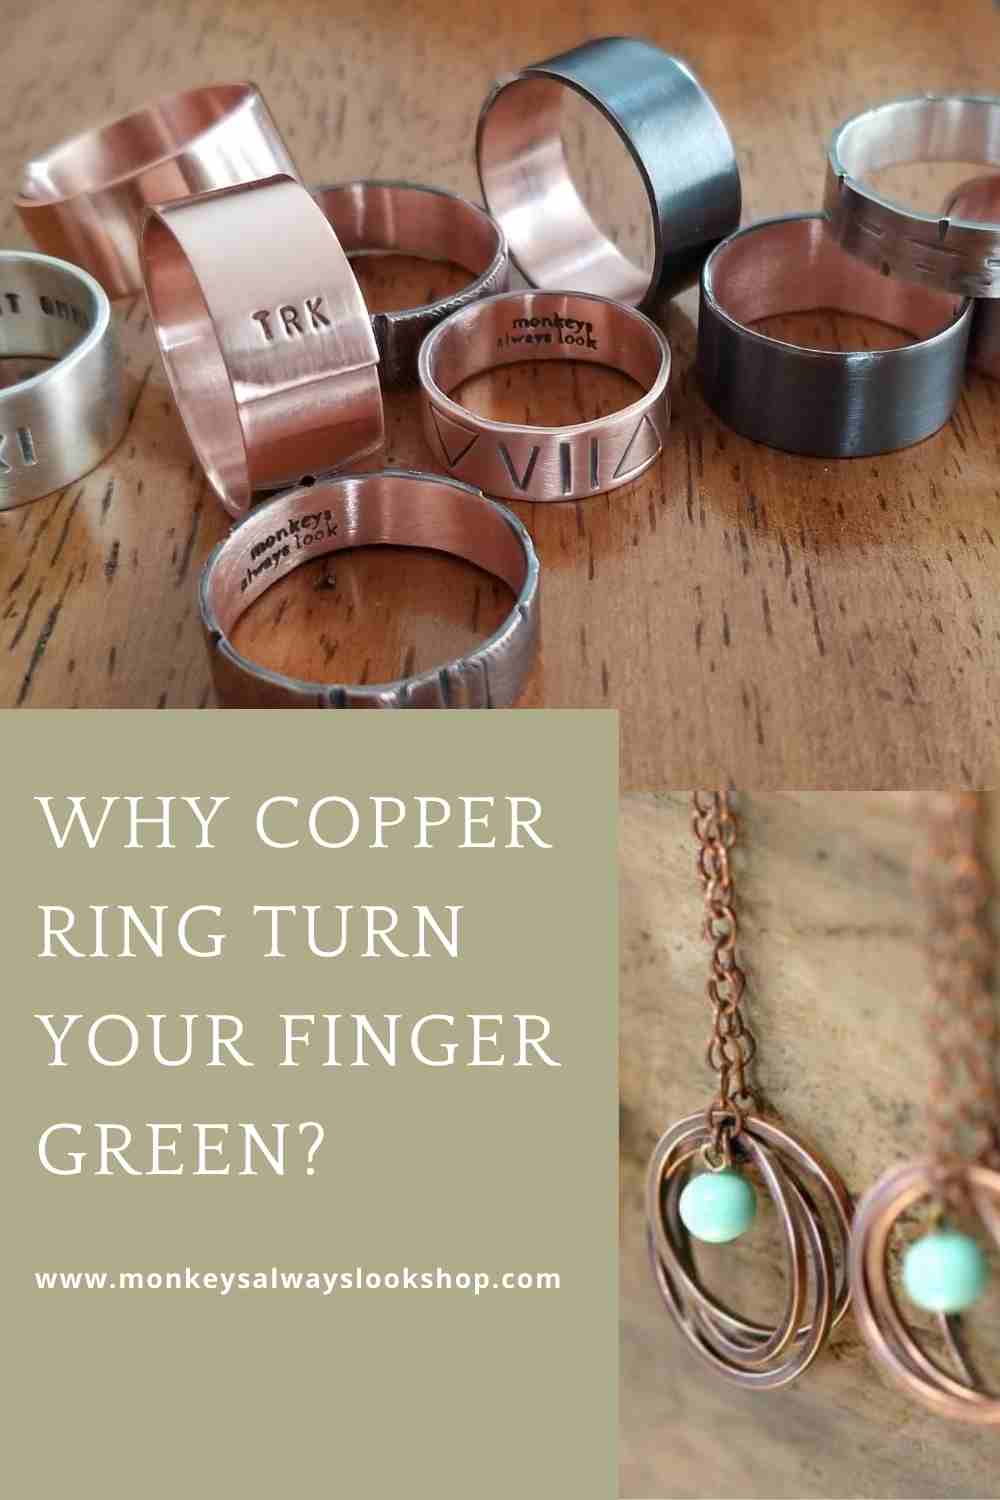 Why copper ring turn your finger green